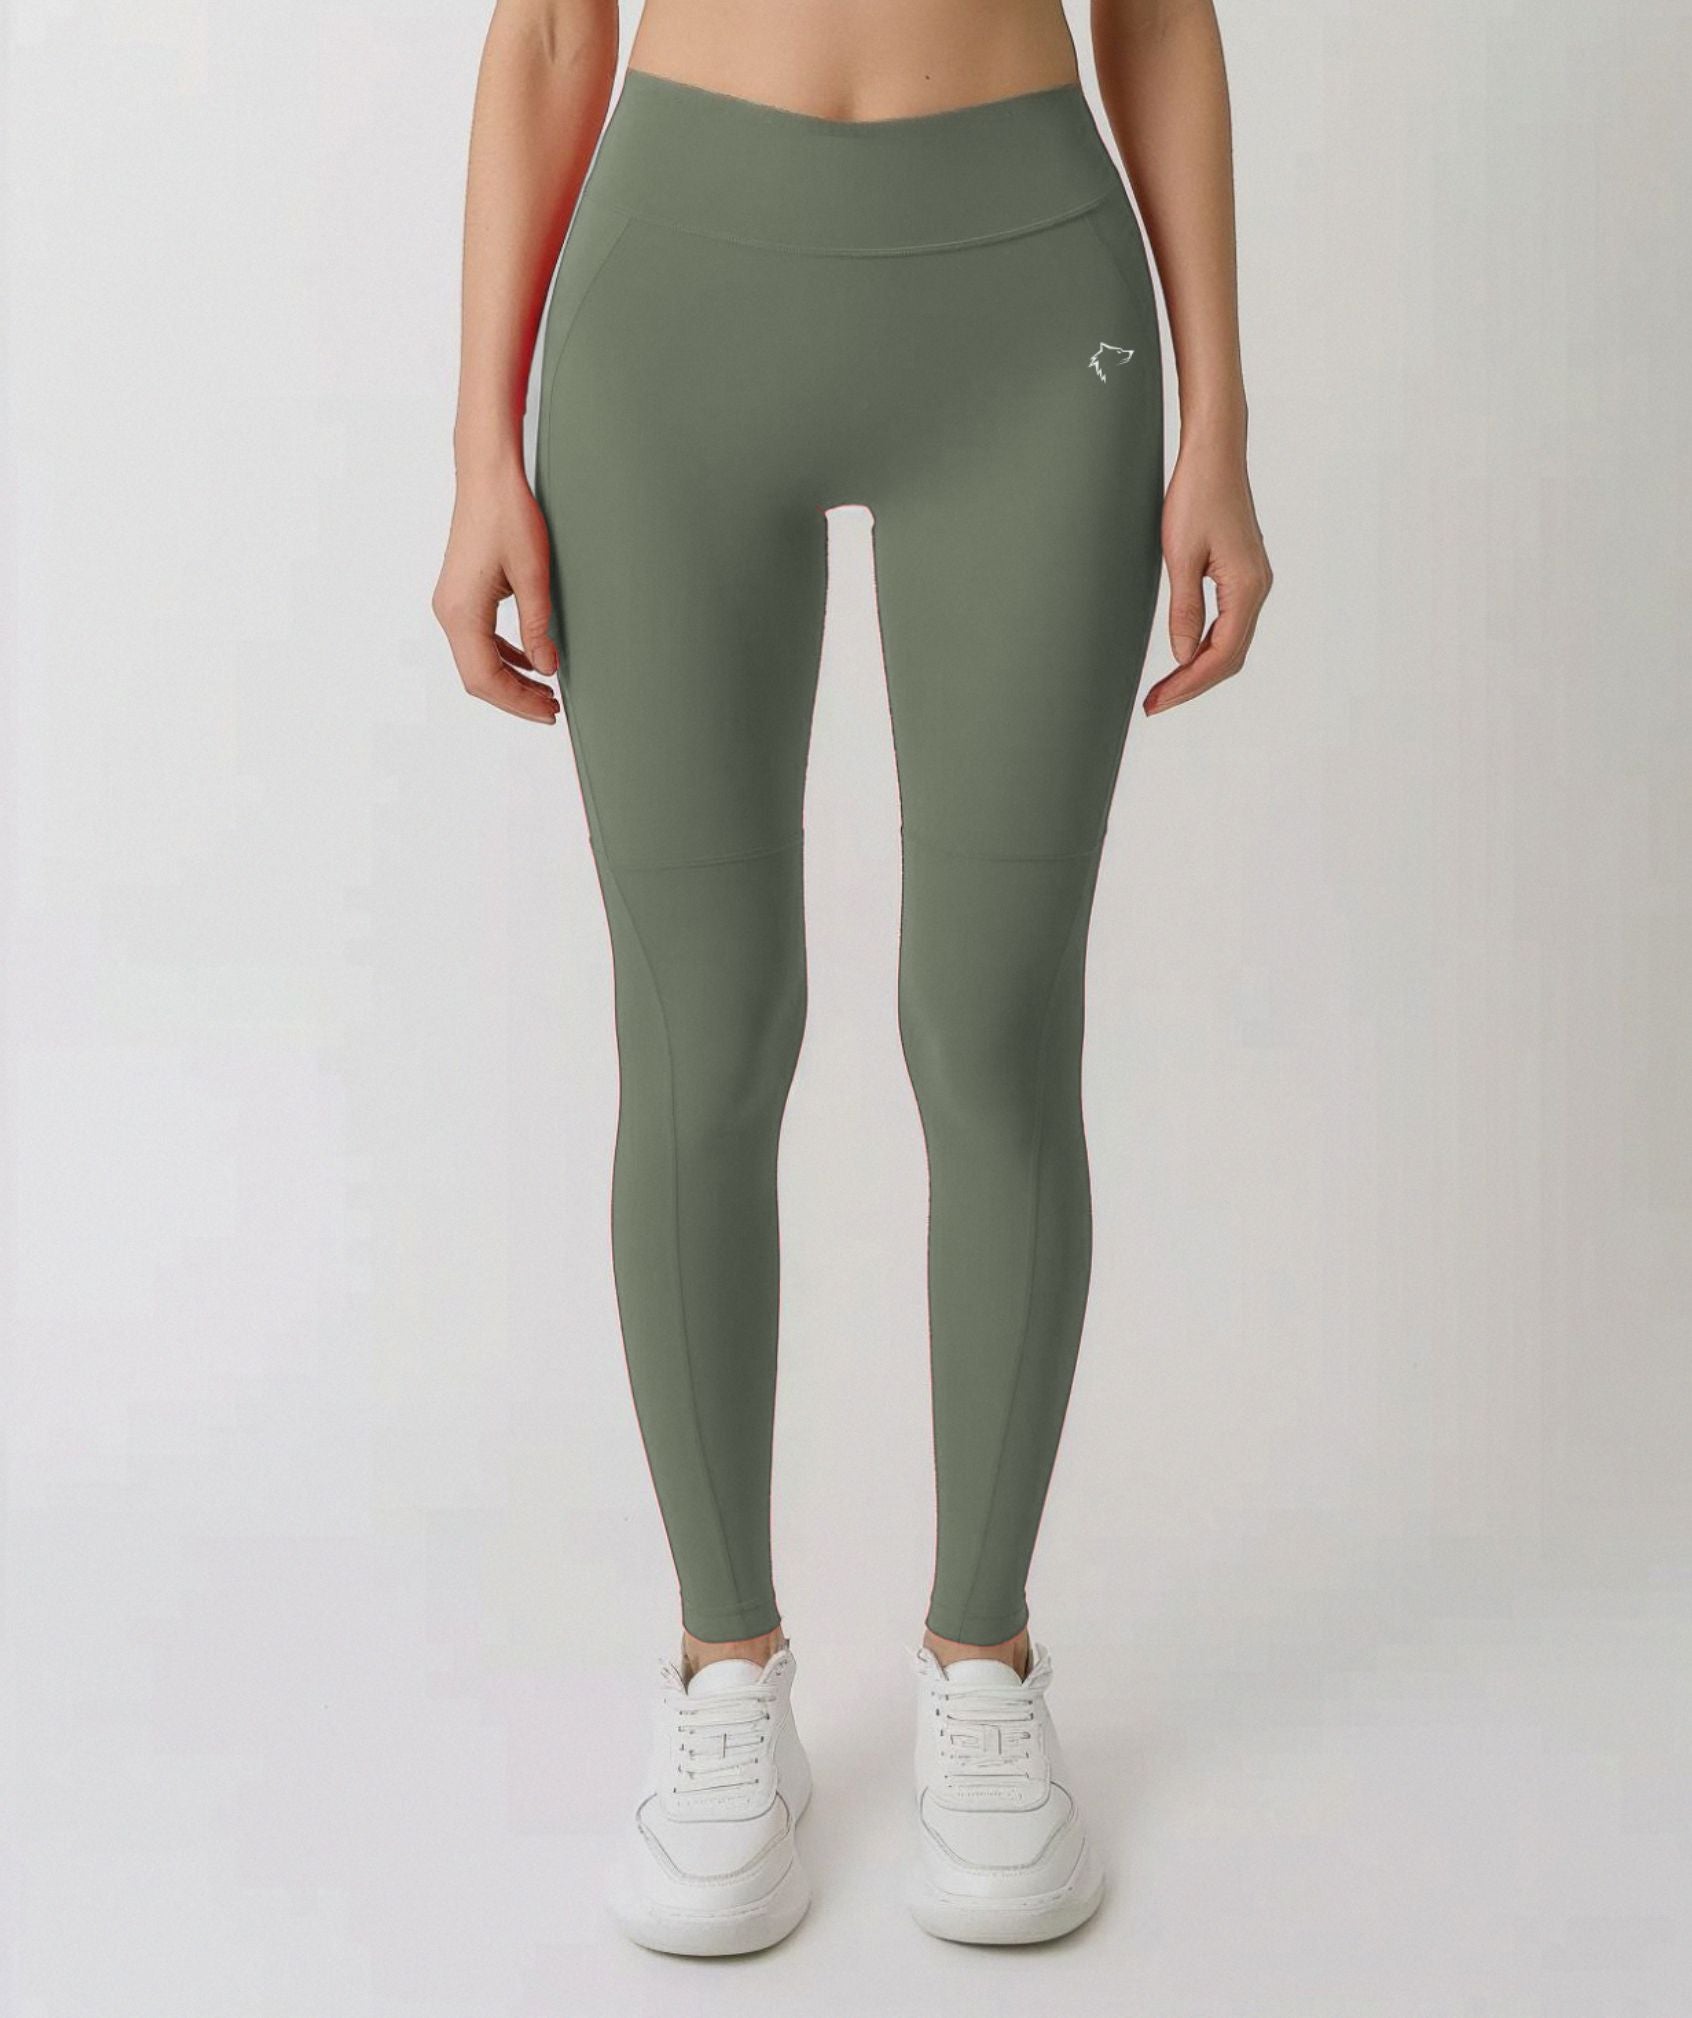 Apex™ army green Harmony Leggings front view - eco-friendly and comfortable leggings